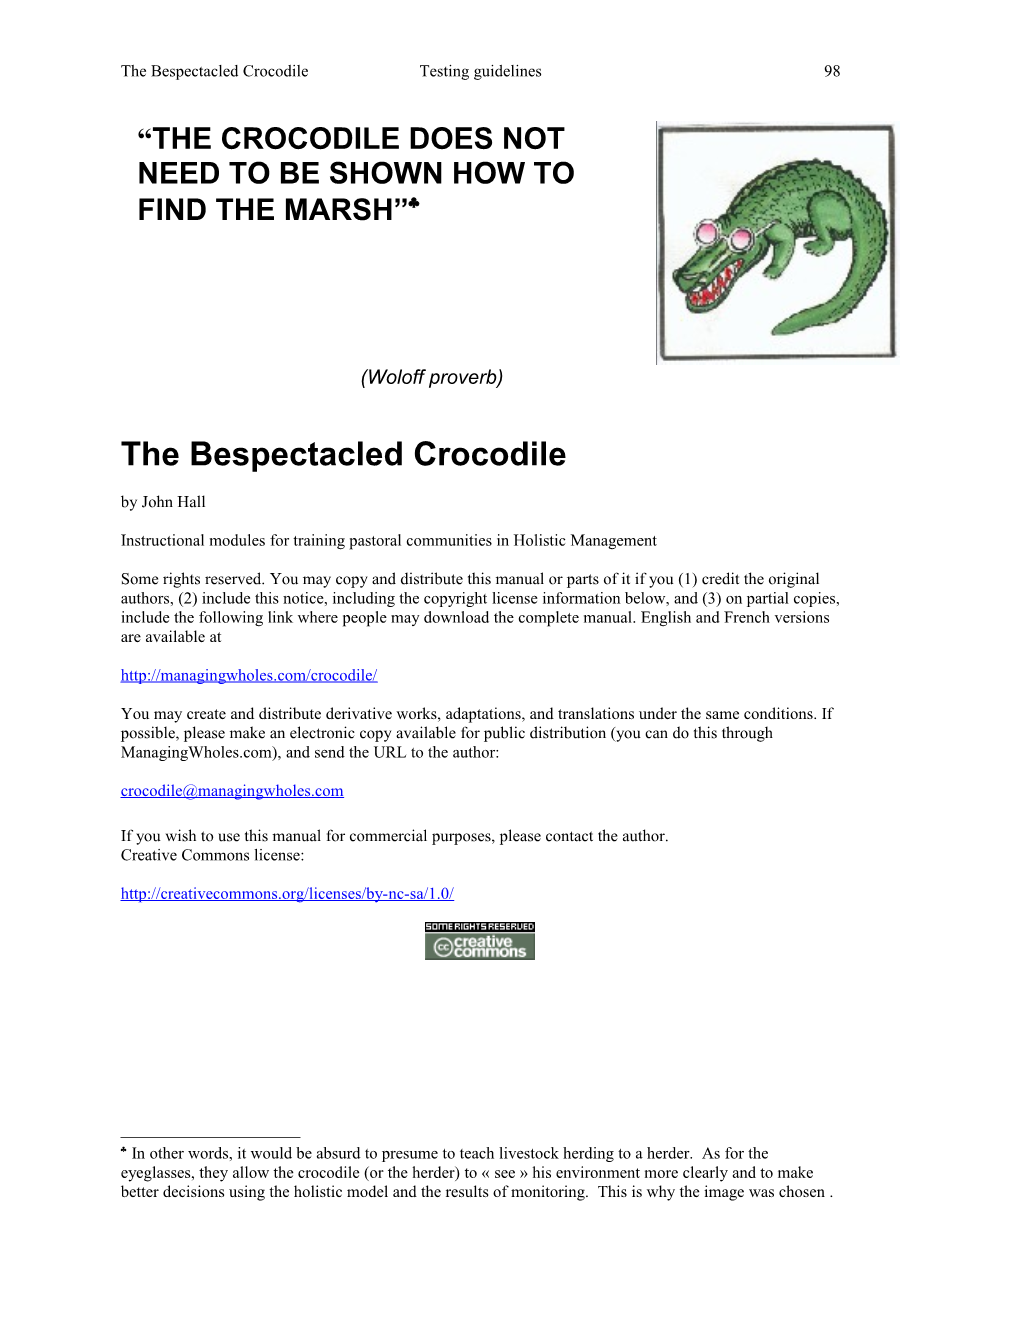 The Bespectacled Crocodile Testing Guidelines 107